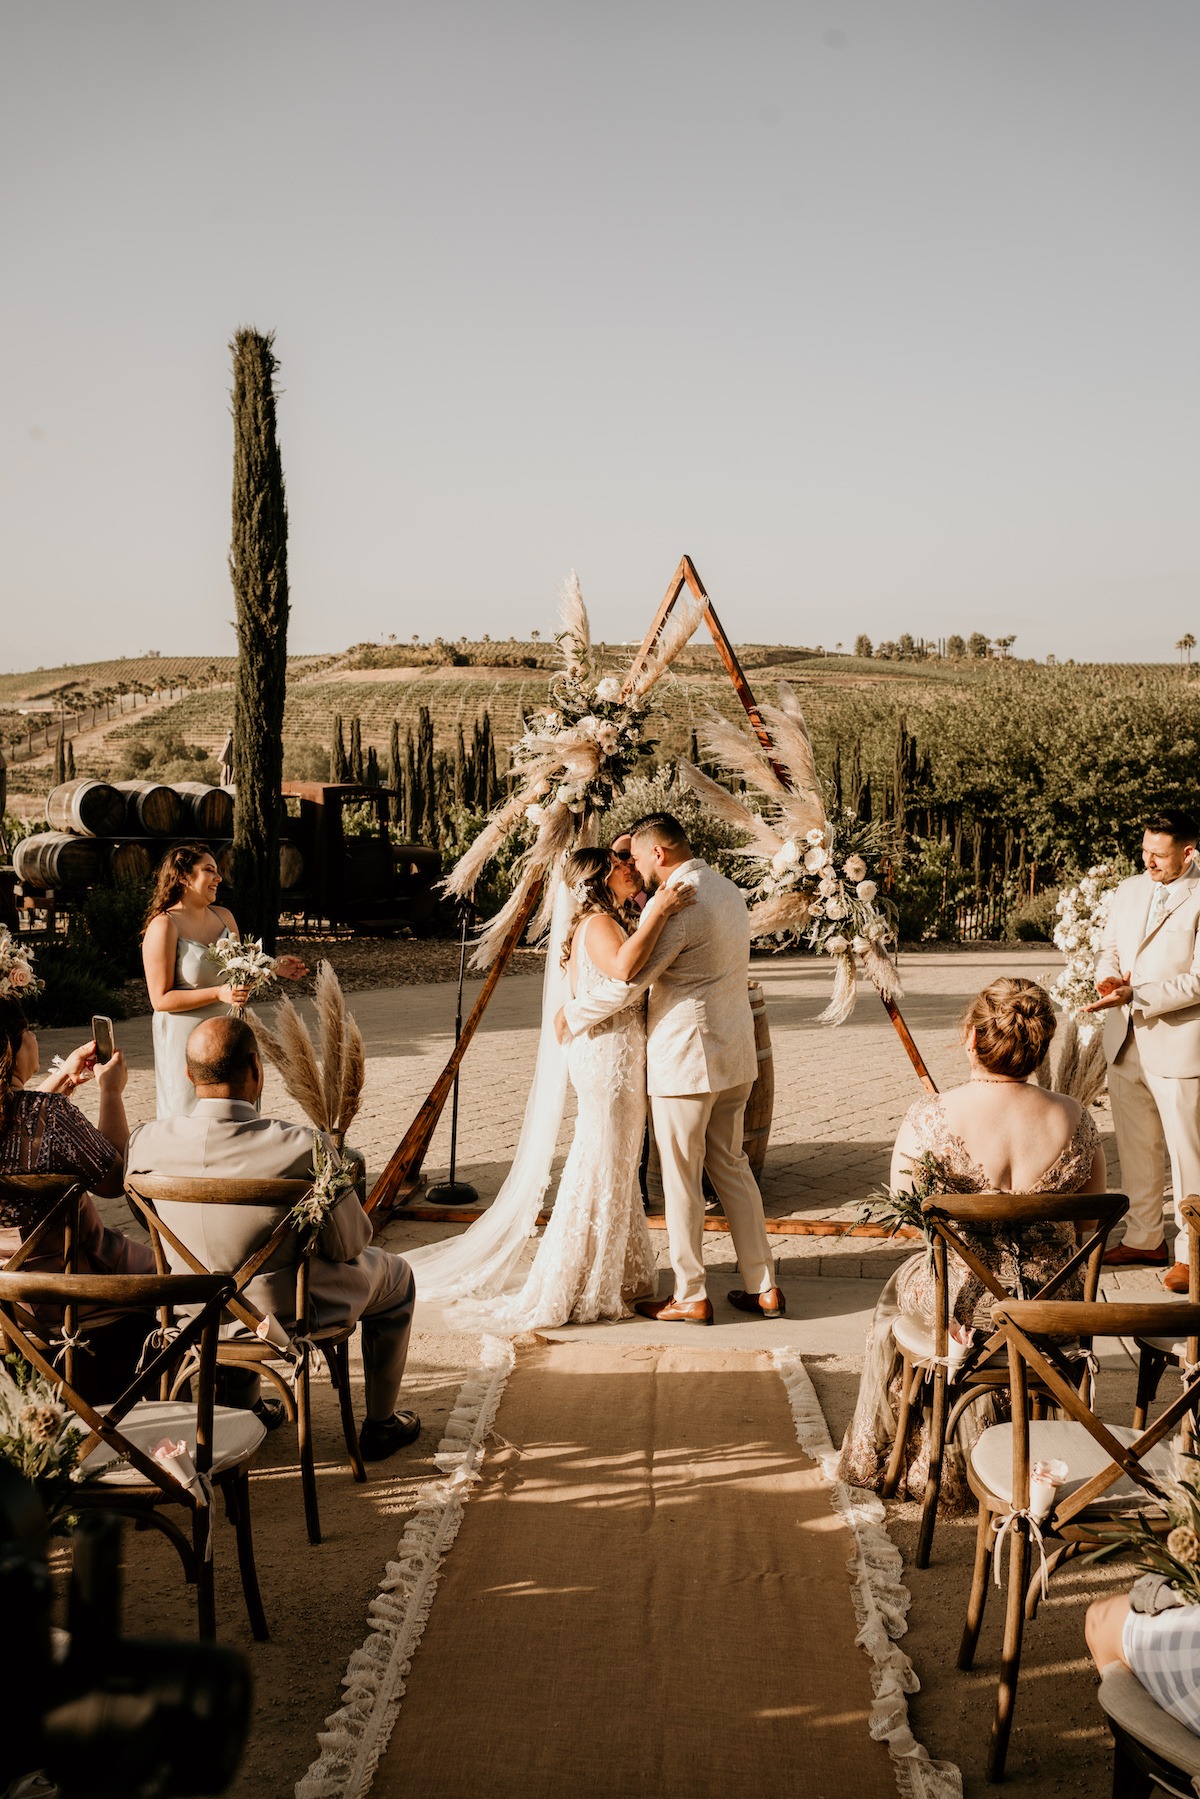 The Coolest Country Wedding Locale in Cali Does Exist and We Absolutely Adore It